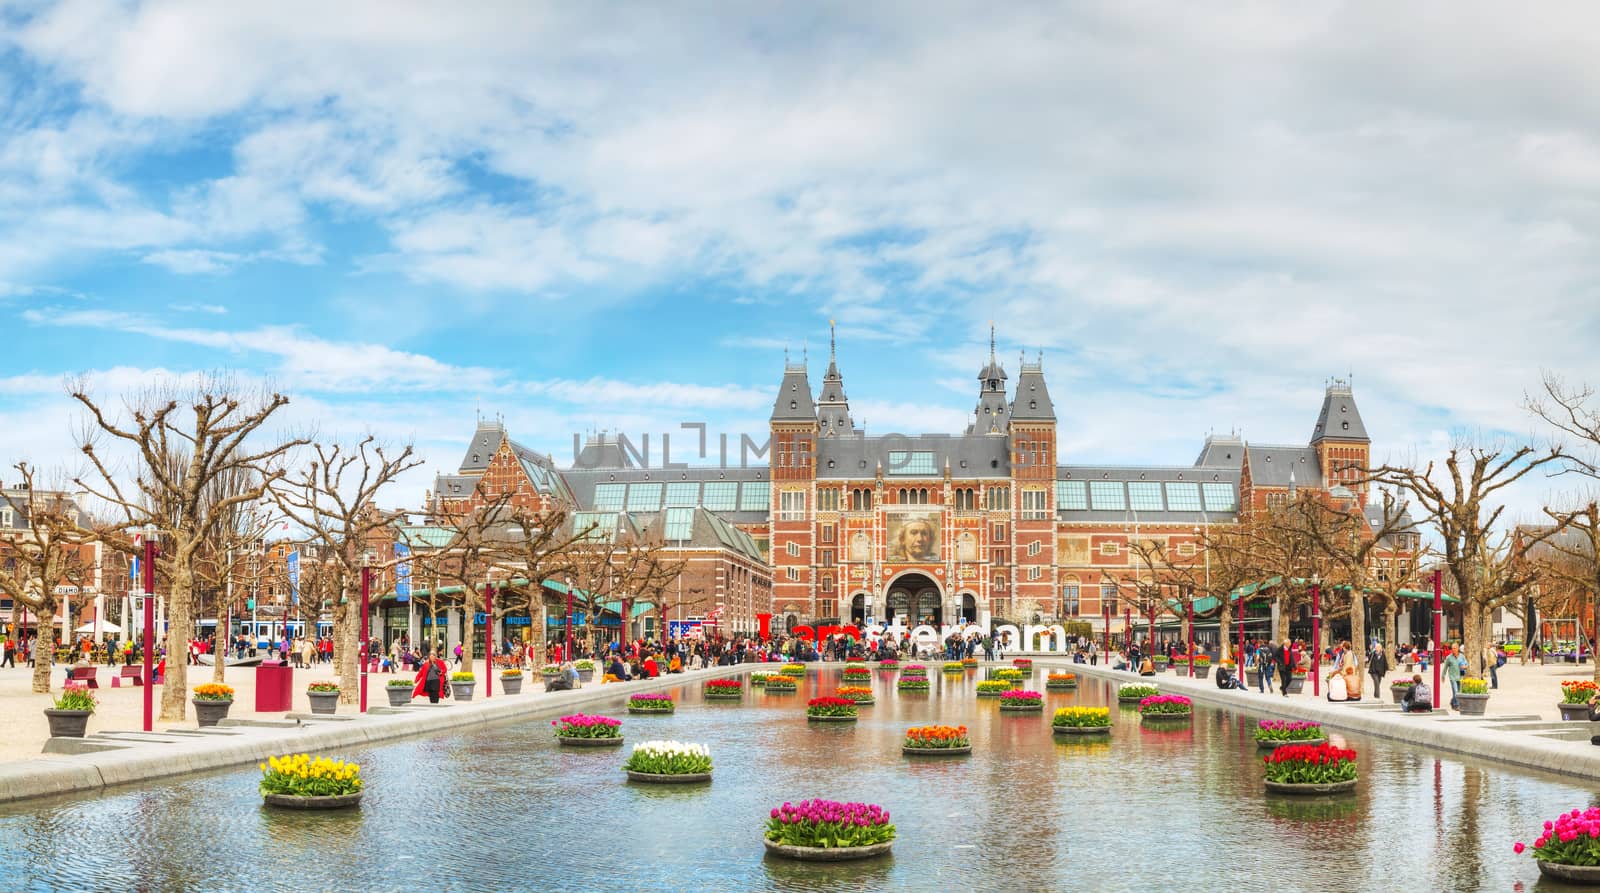 AMSTERDAM - APRIL 16: I Amsterdam slogan on April 16, 2015 in Amsterdam, Netherlands. Located at the back of the Rijksmuseum on Museumplein, the slogan quickly became a city icon.